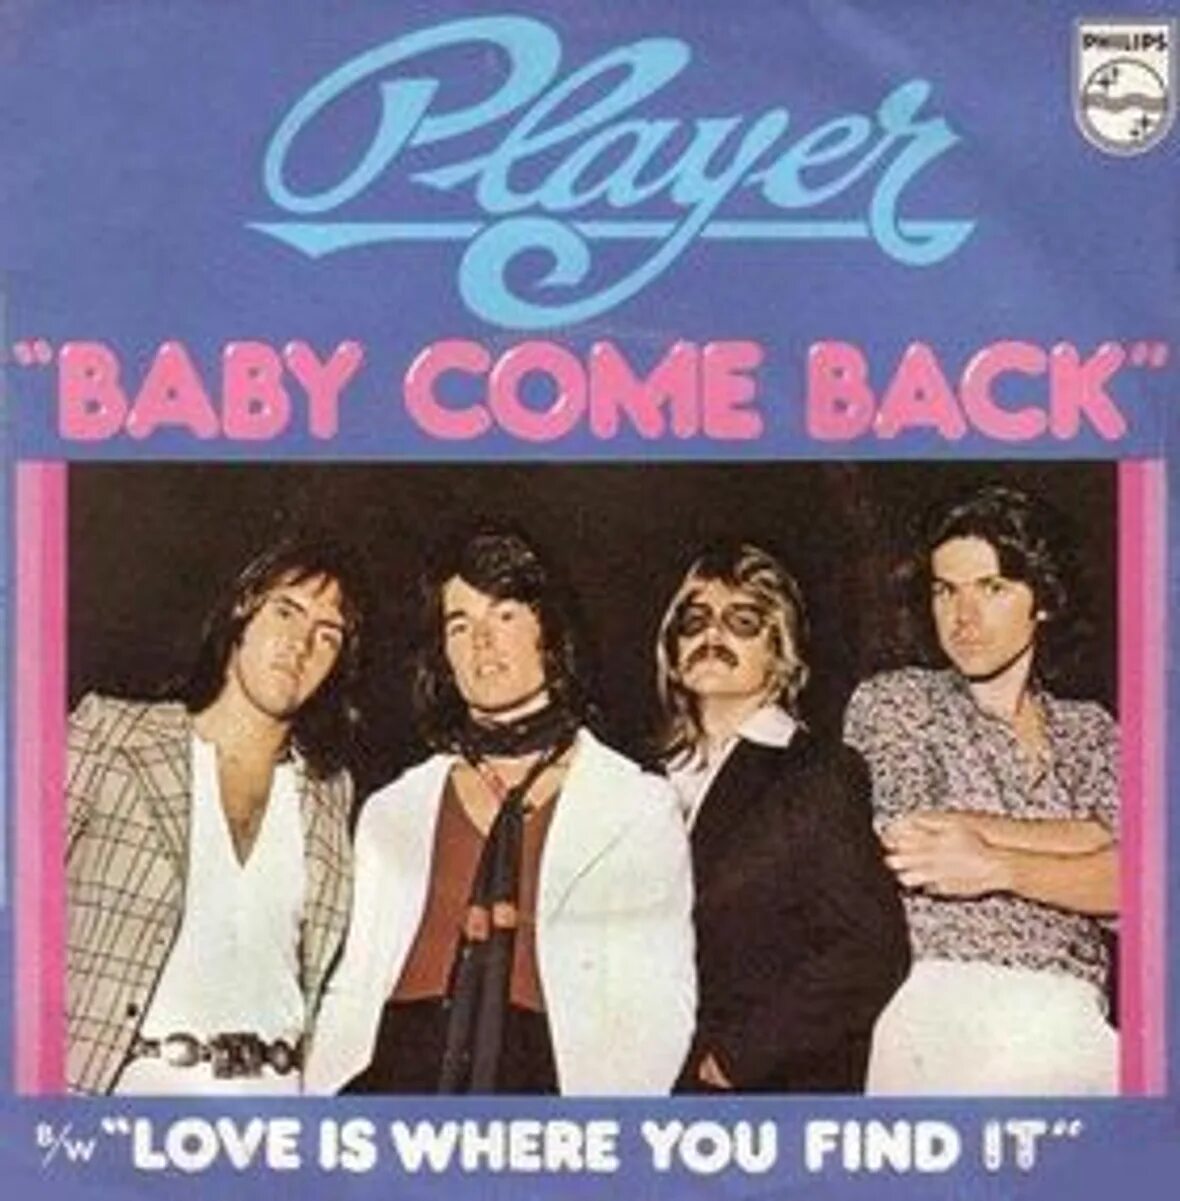 Player Baby come back. Player Baby come back 1977. Baby come back (Player Song). Player Player 1977. Песни baby back